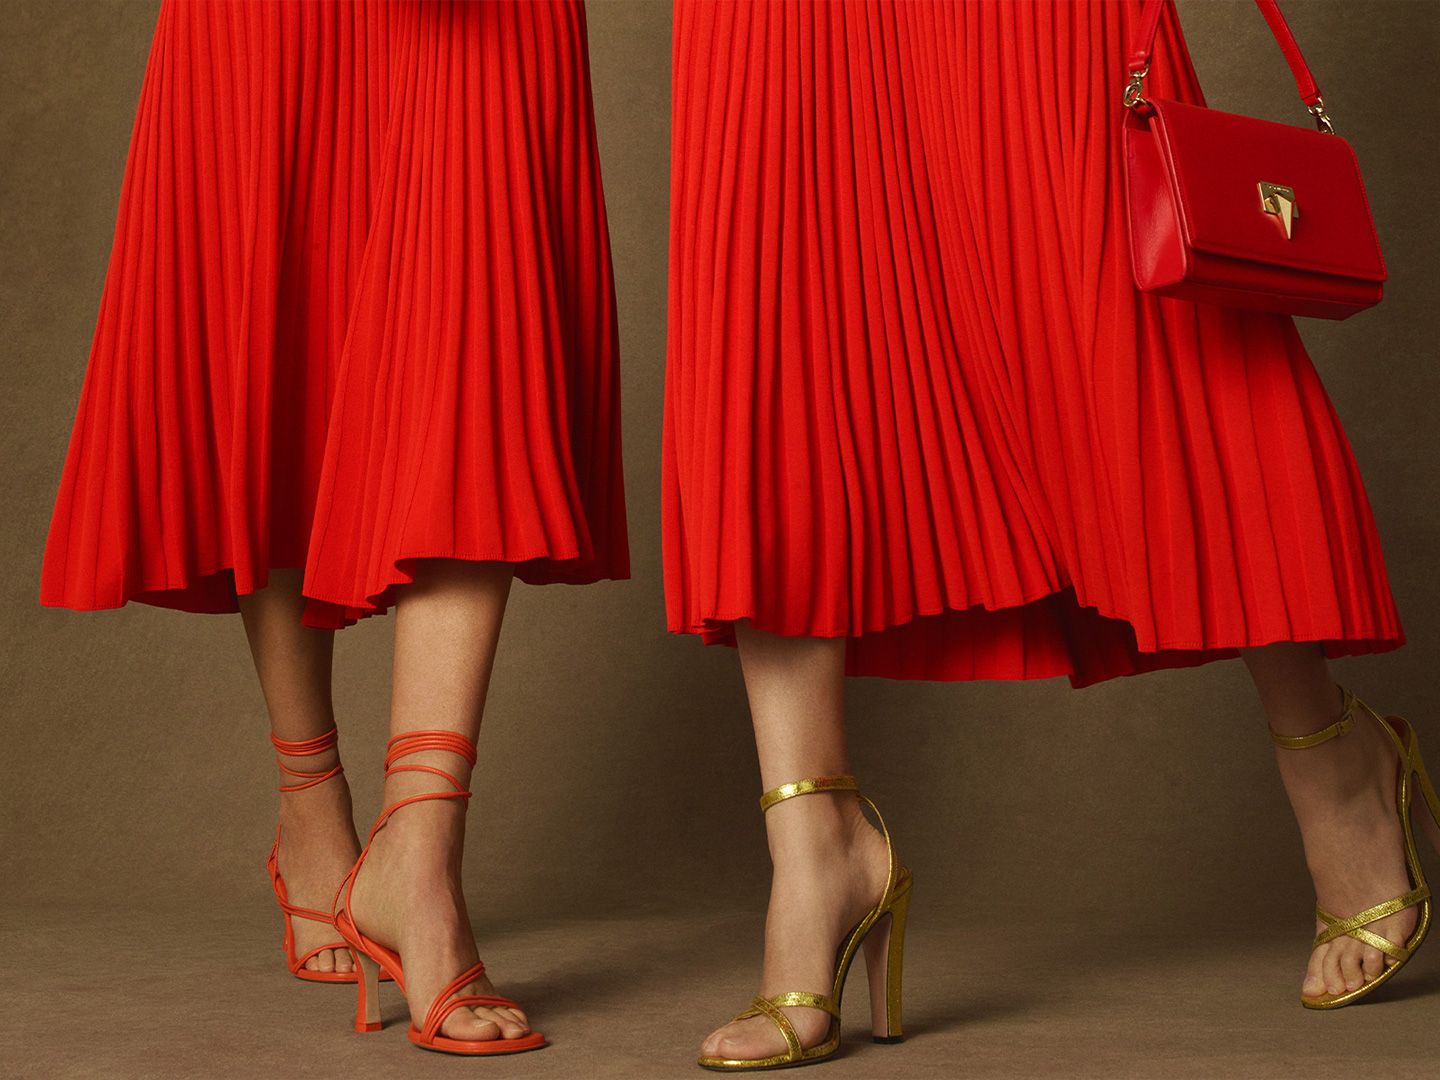 Two models from the legs down both wearing red pleated midi skirts and strappy heels